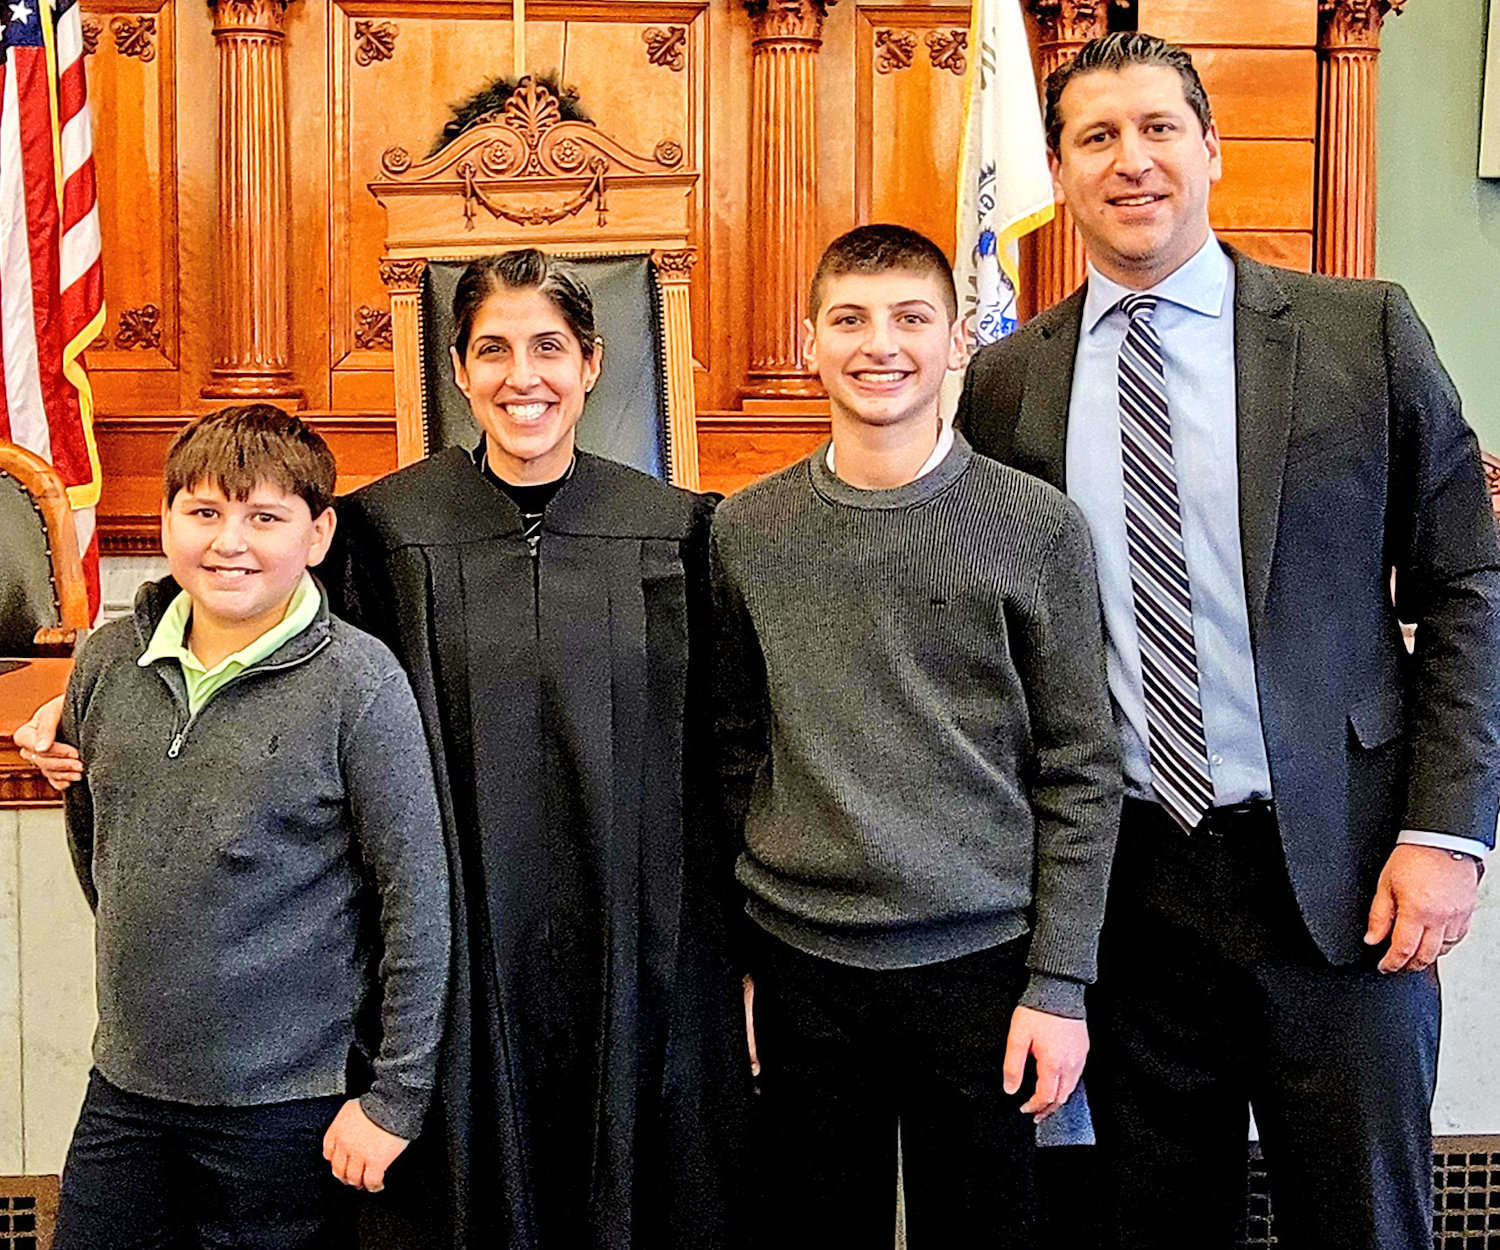 SWORN IN - Danielle Fogel, the newly elected State Supreme Court Justice for the Fifth Judicial District was sworn in on Tuesday, Dec. 28  at the Onondaga County Courthouse.